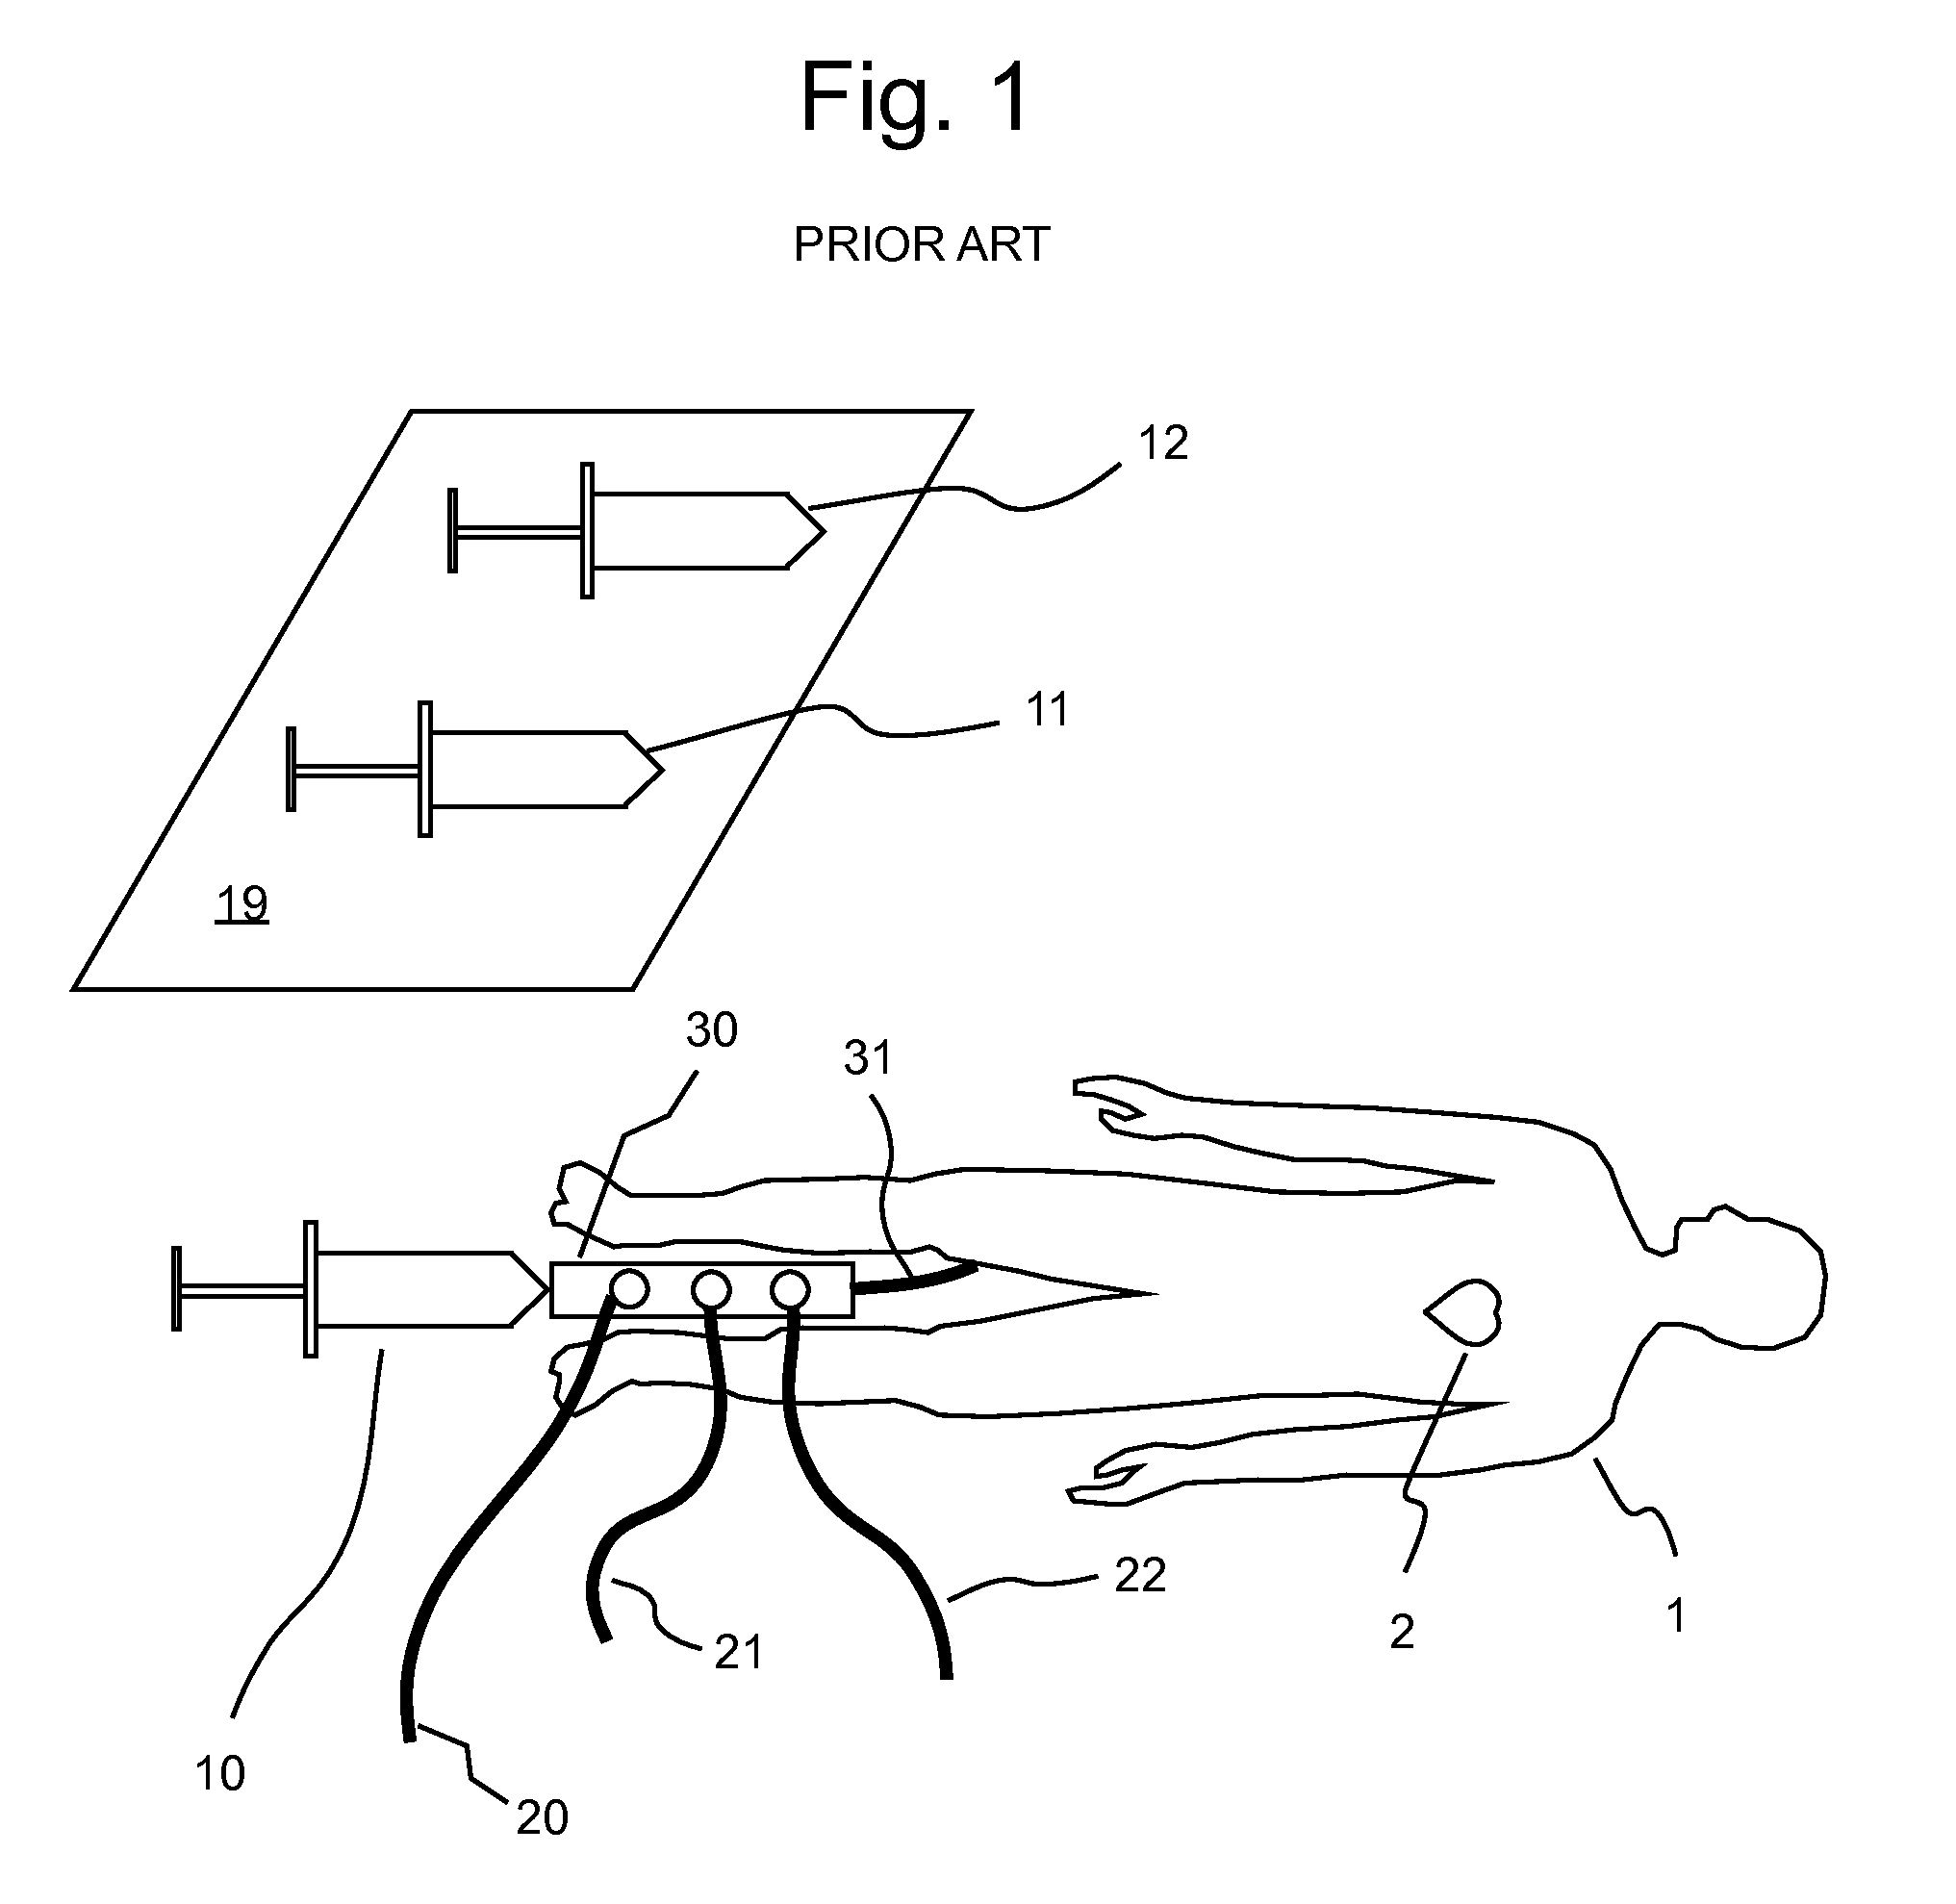 Fluid delivery systems, devices and methods for delivery of hazardous fluids